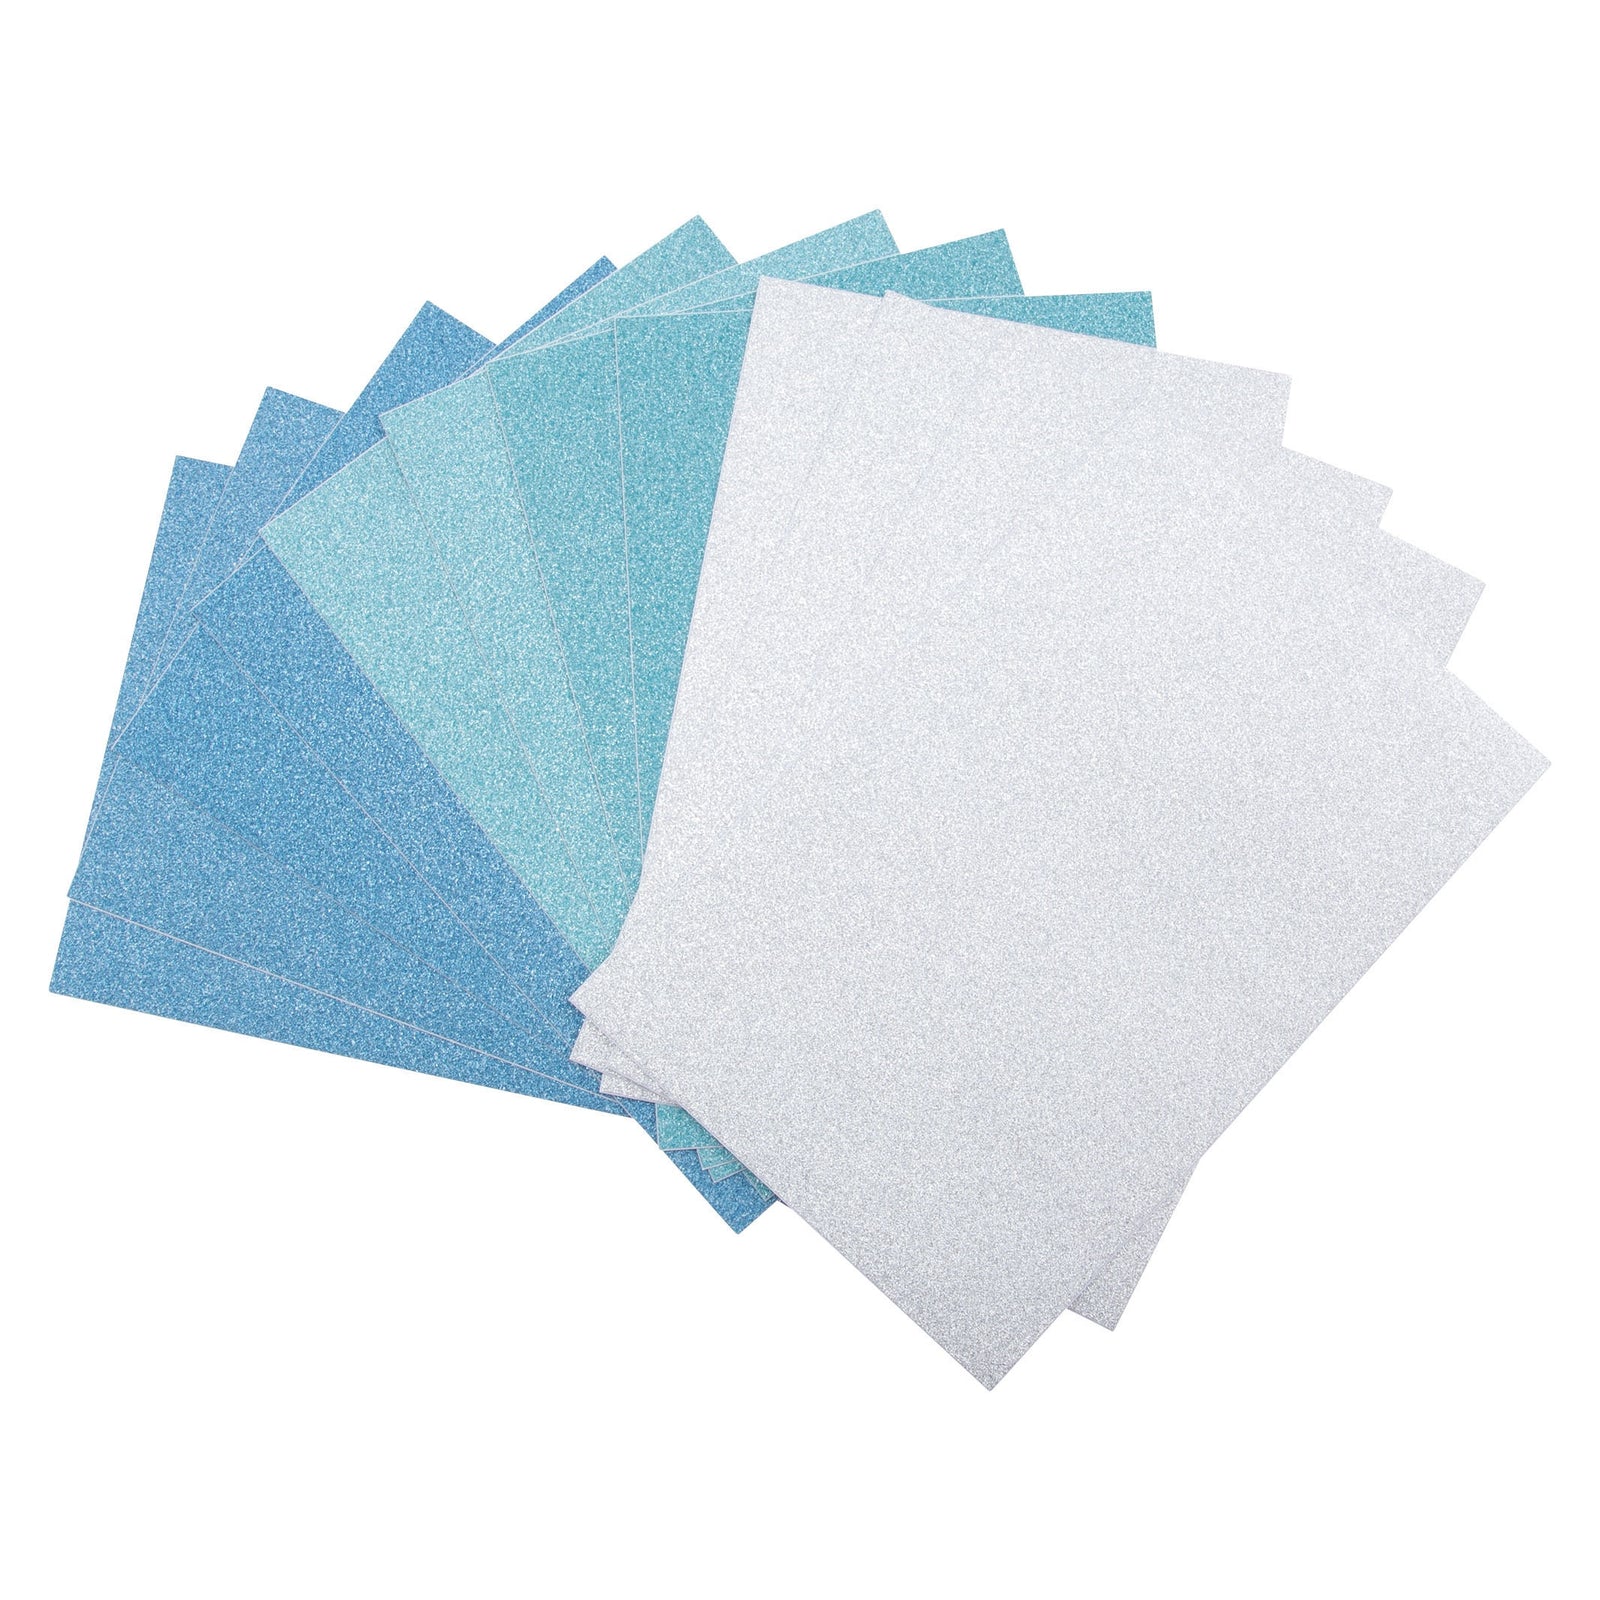 4x6 Adhesive Deco Sheets - 12 Sheets - WINTER - Idea-Ology - Tim Holtz